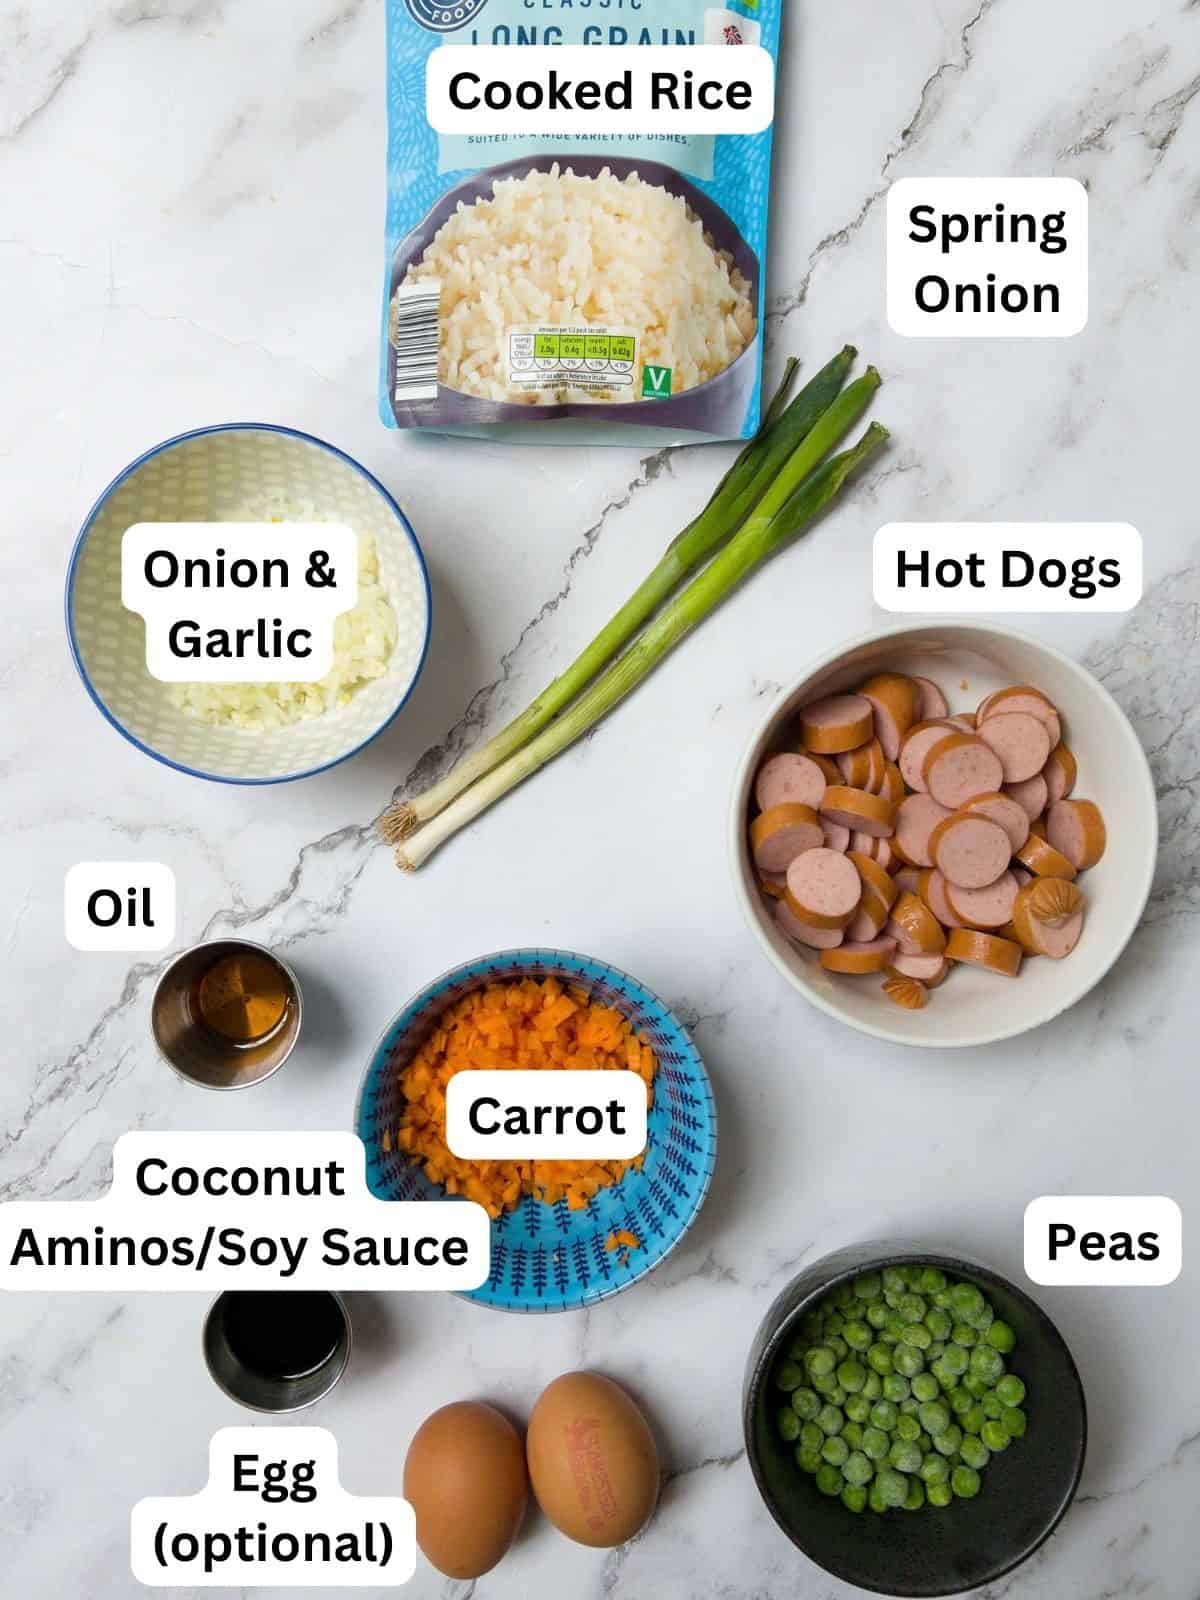 Ingredients laid out for hot dog fried rice.